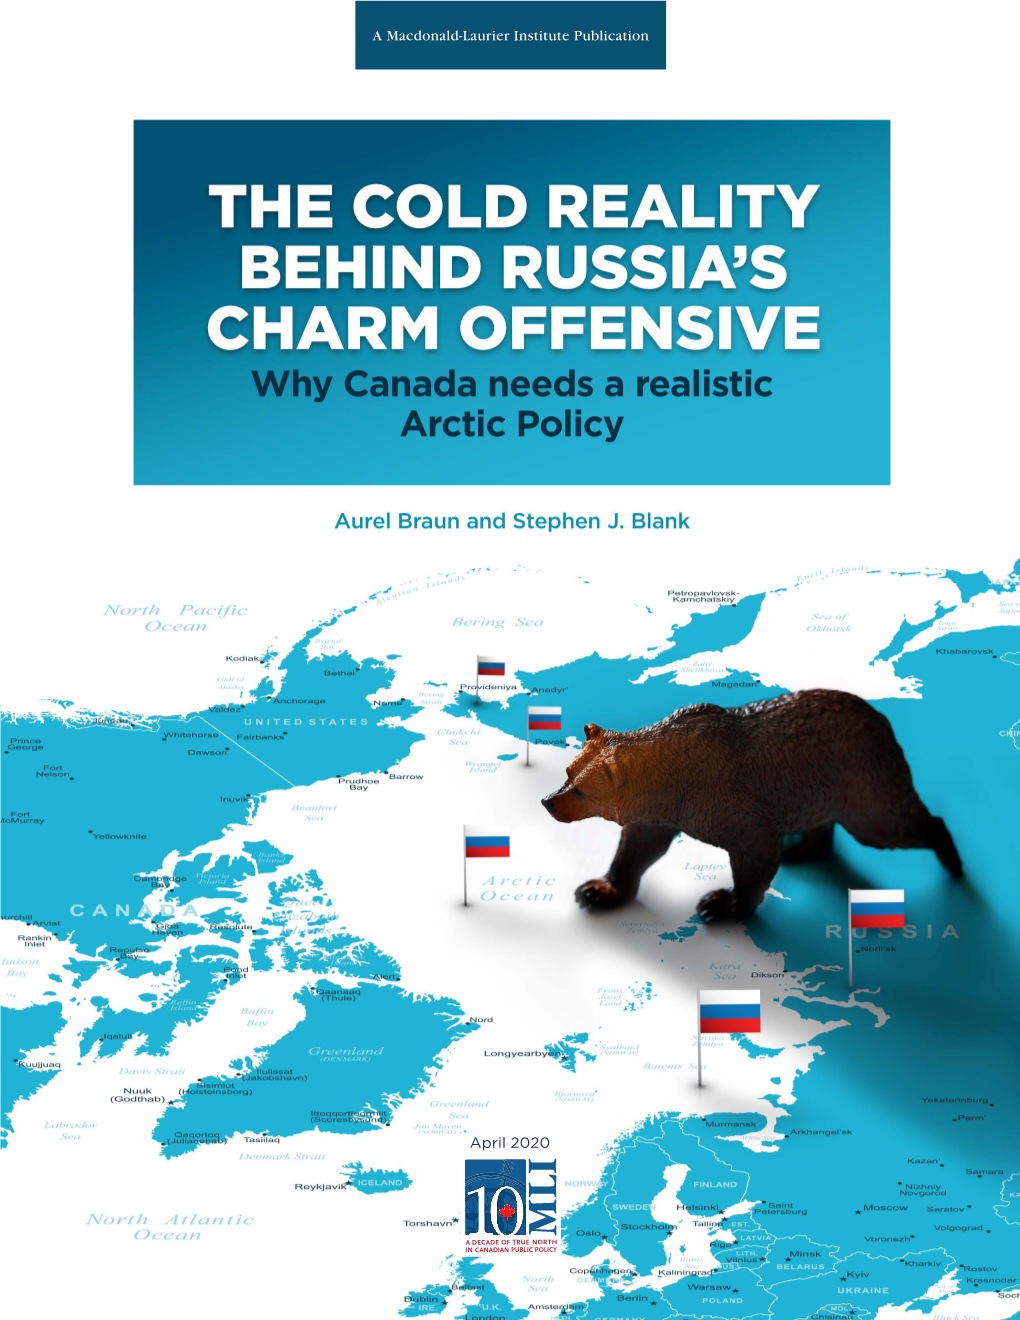 The Cold Reality Behind Russia's